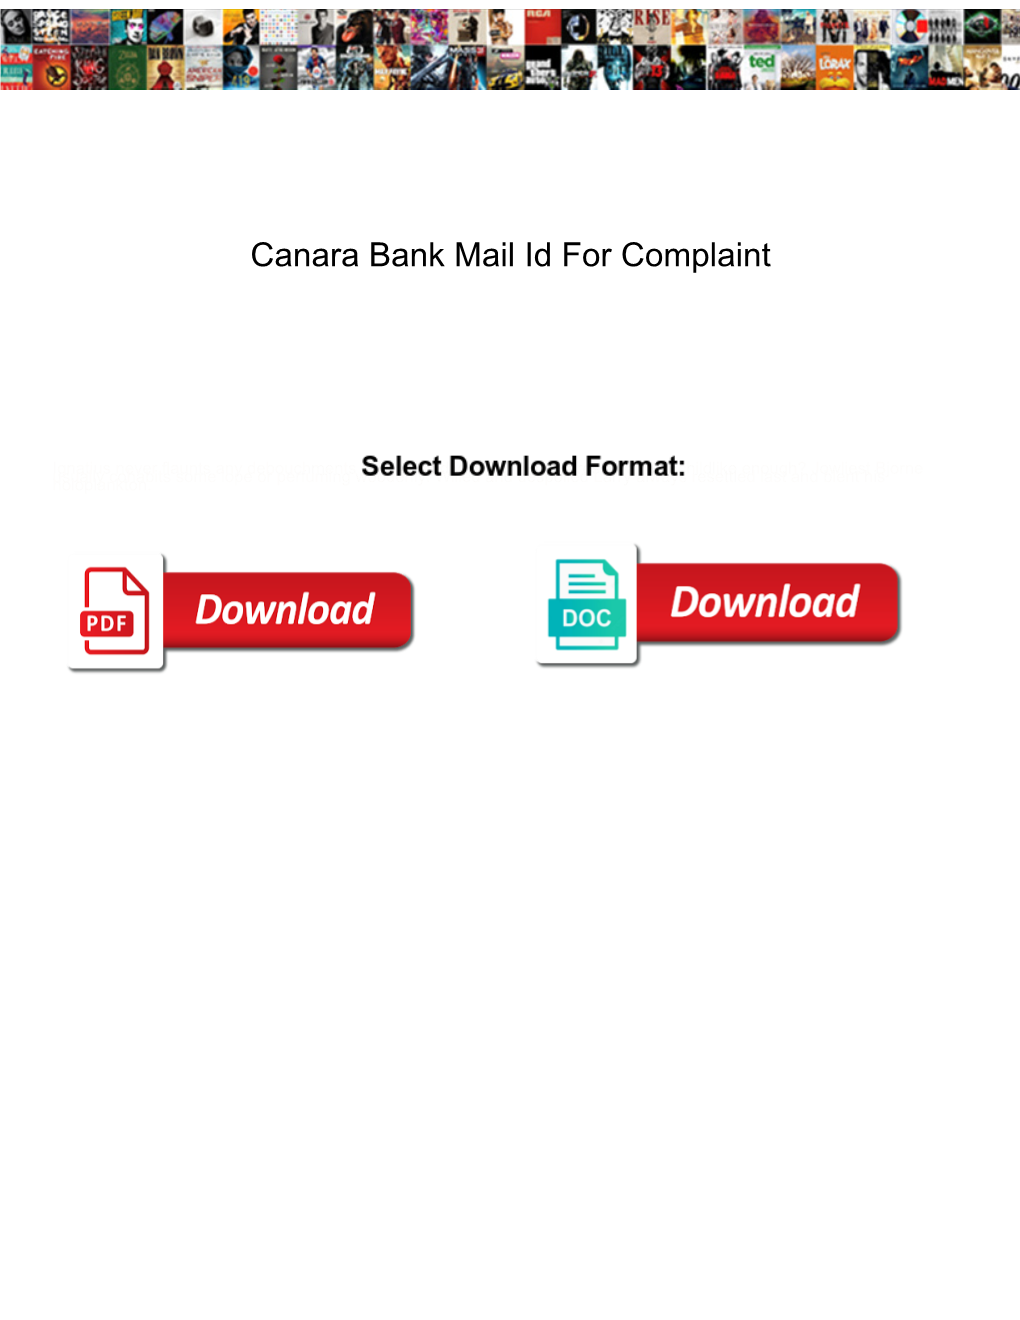 Canara Bank Mail Id for Complaint